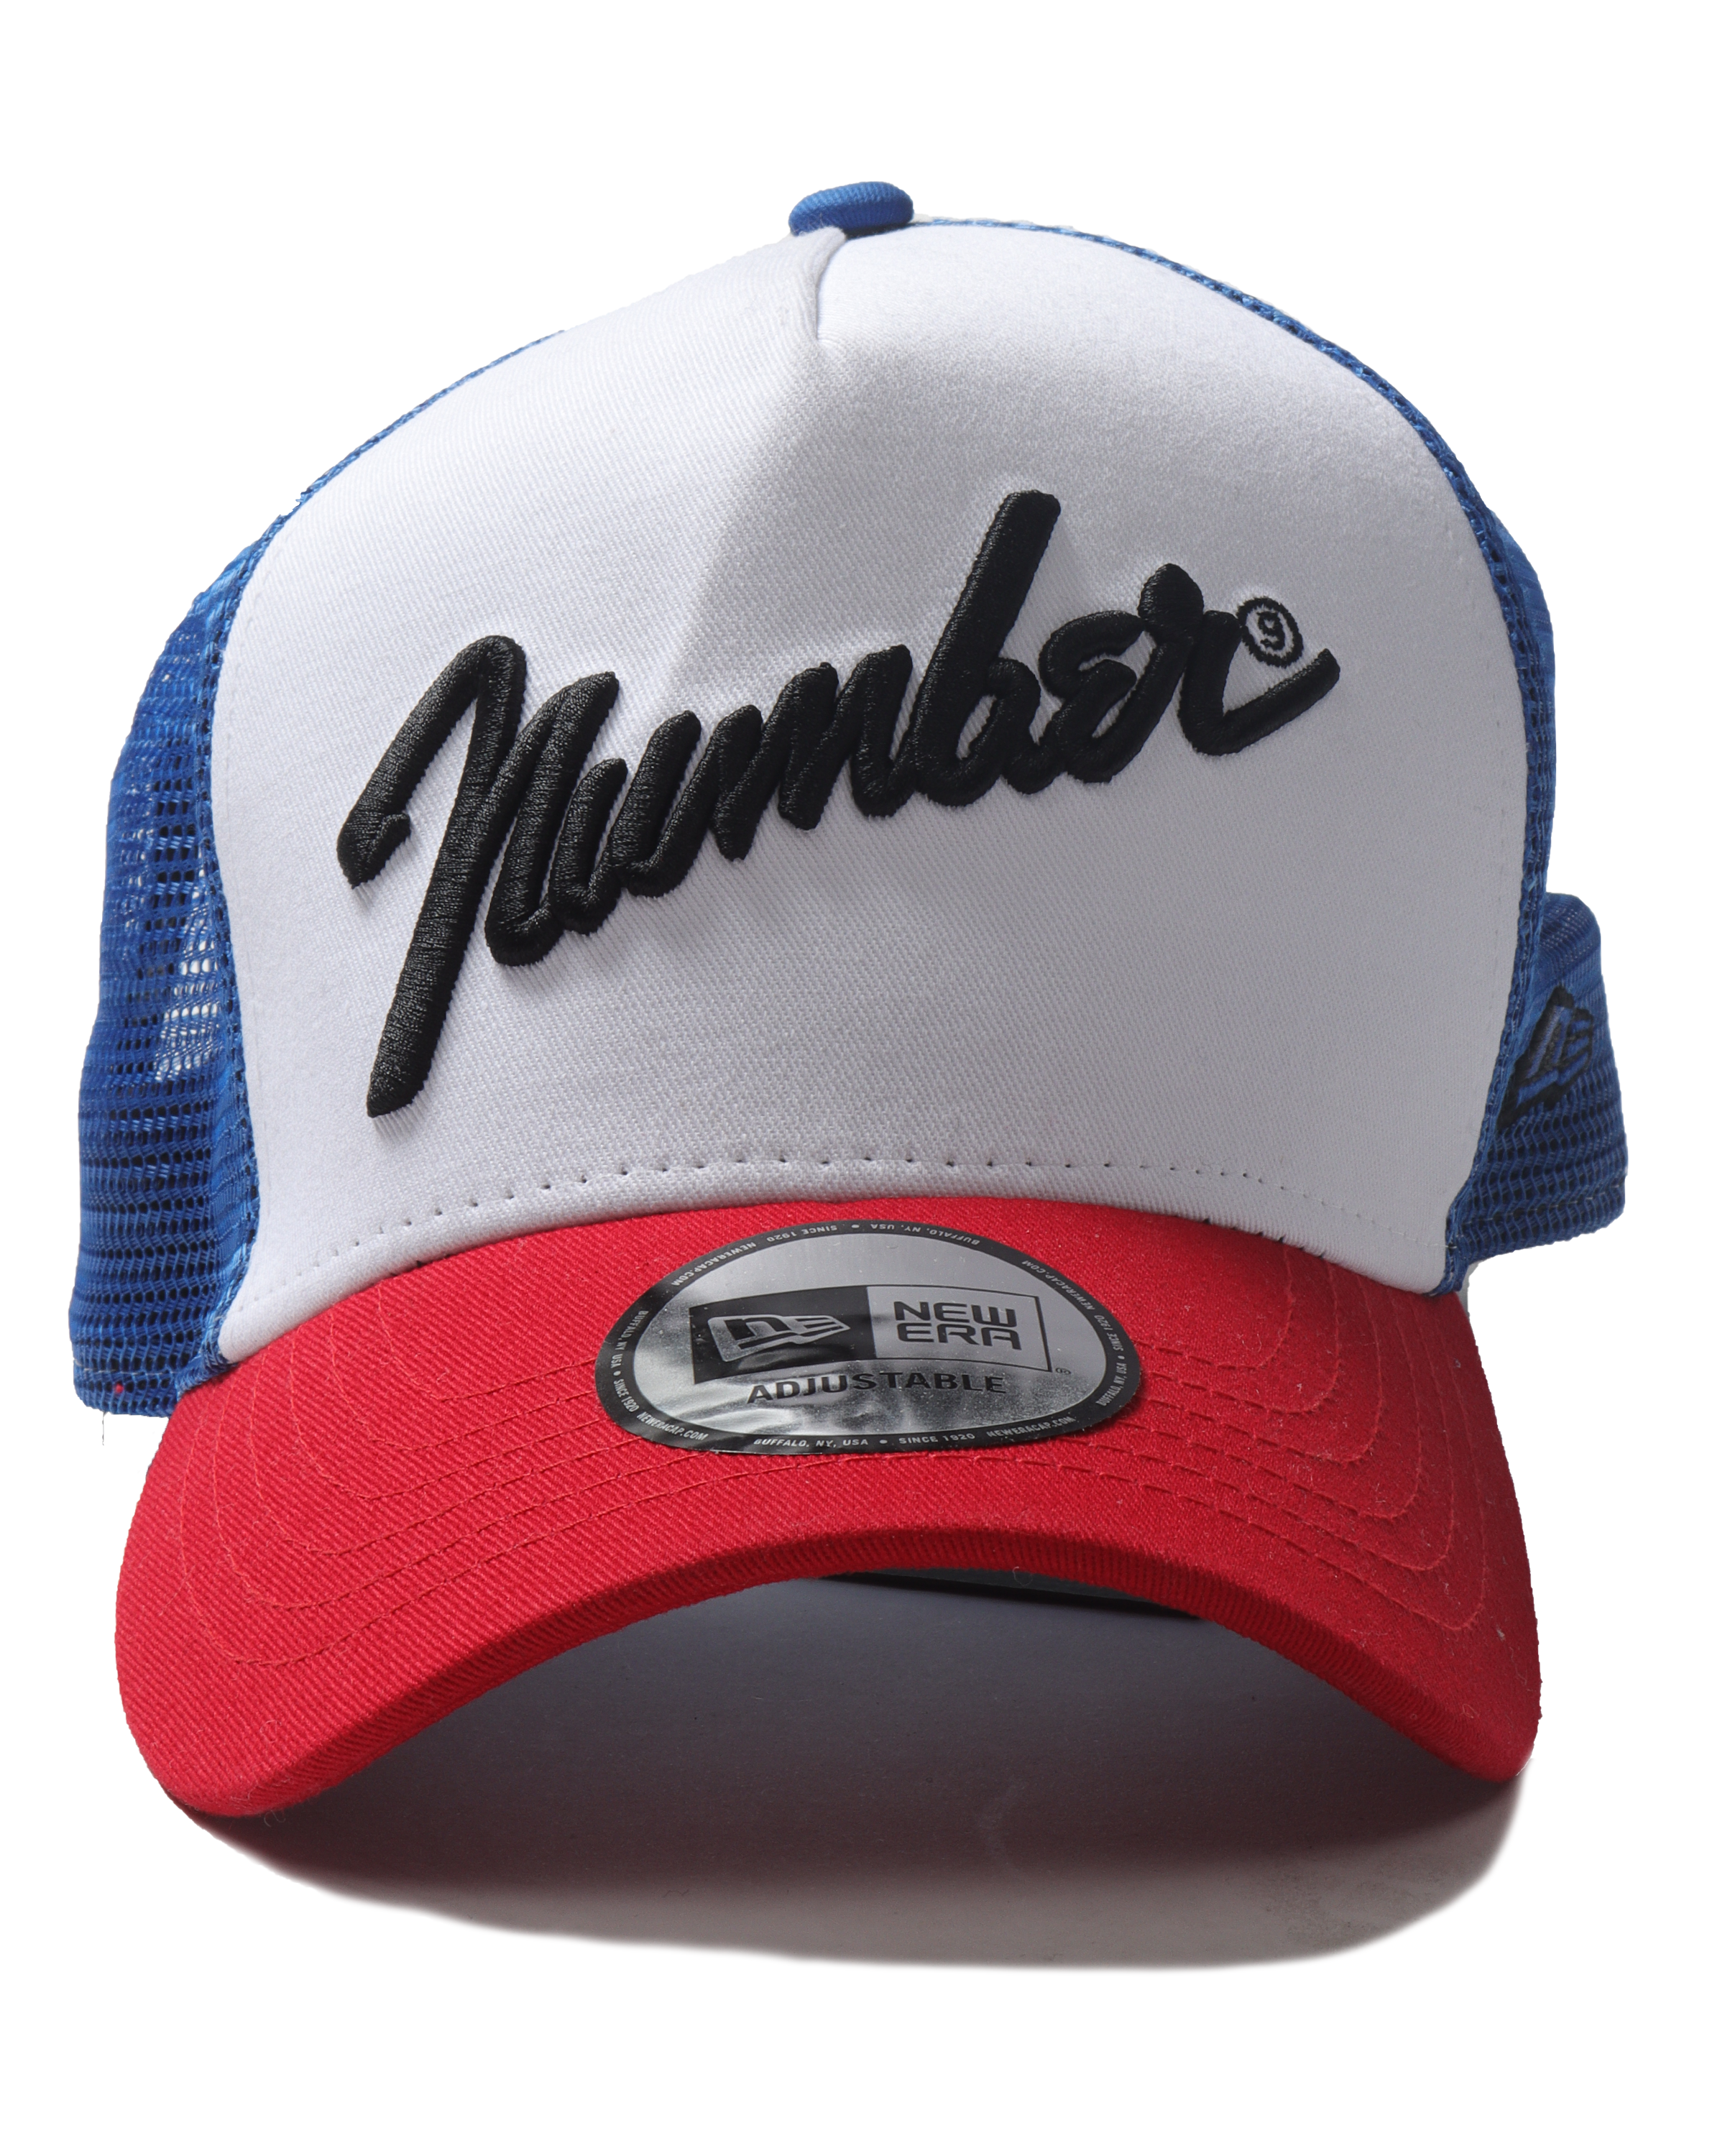 Blue and Red Trucker Hat